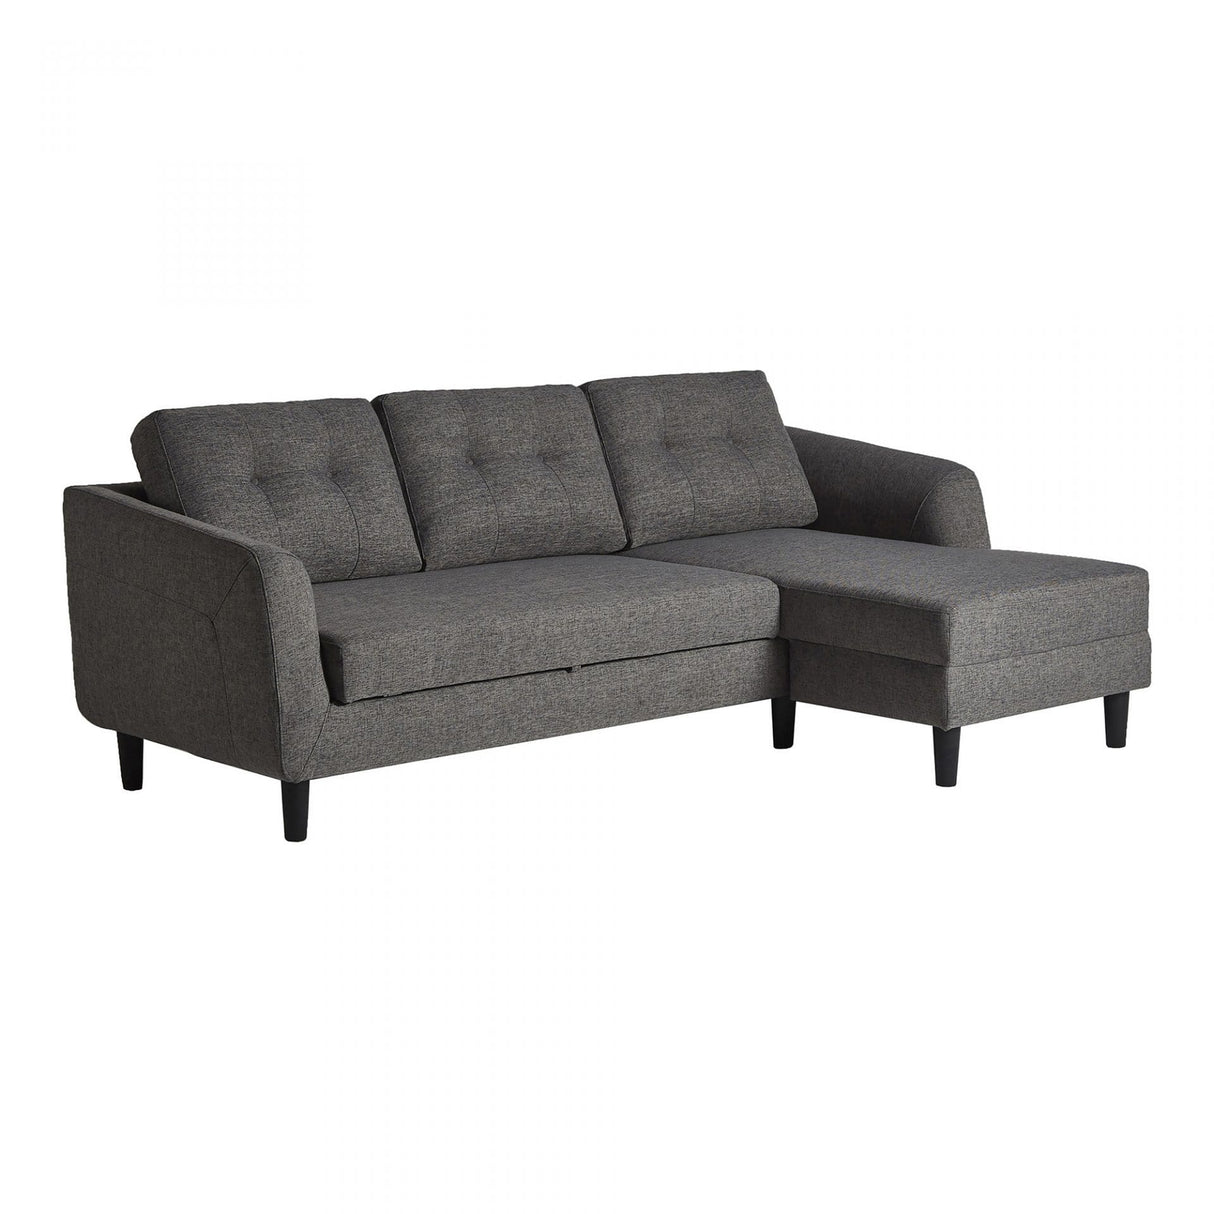 BLU Home Belagio Sofa Bed with Chaise Furniture